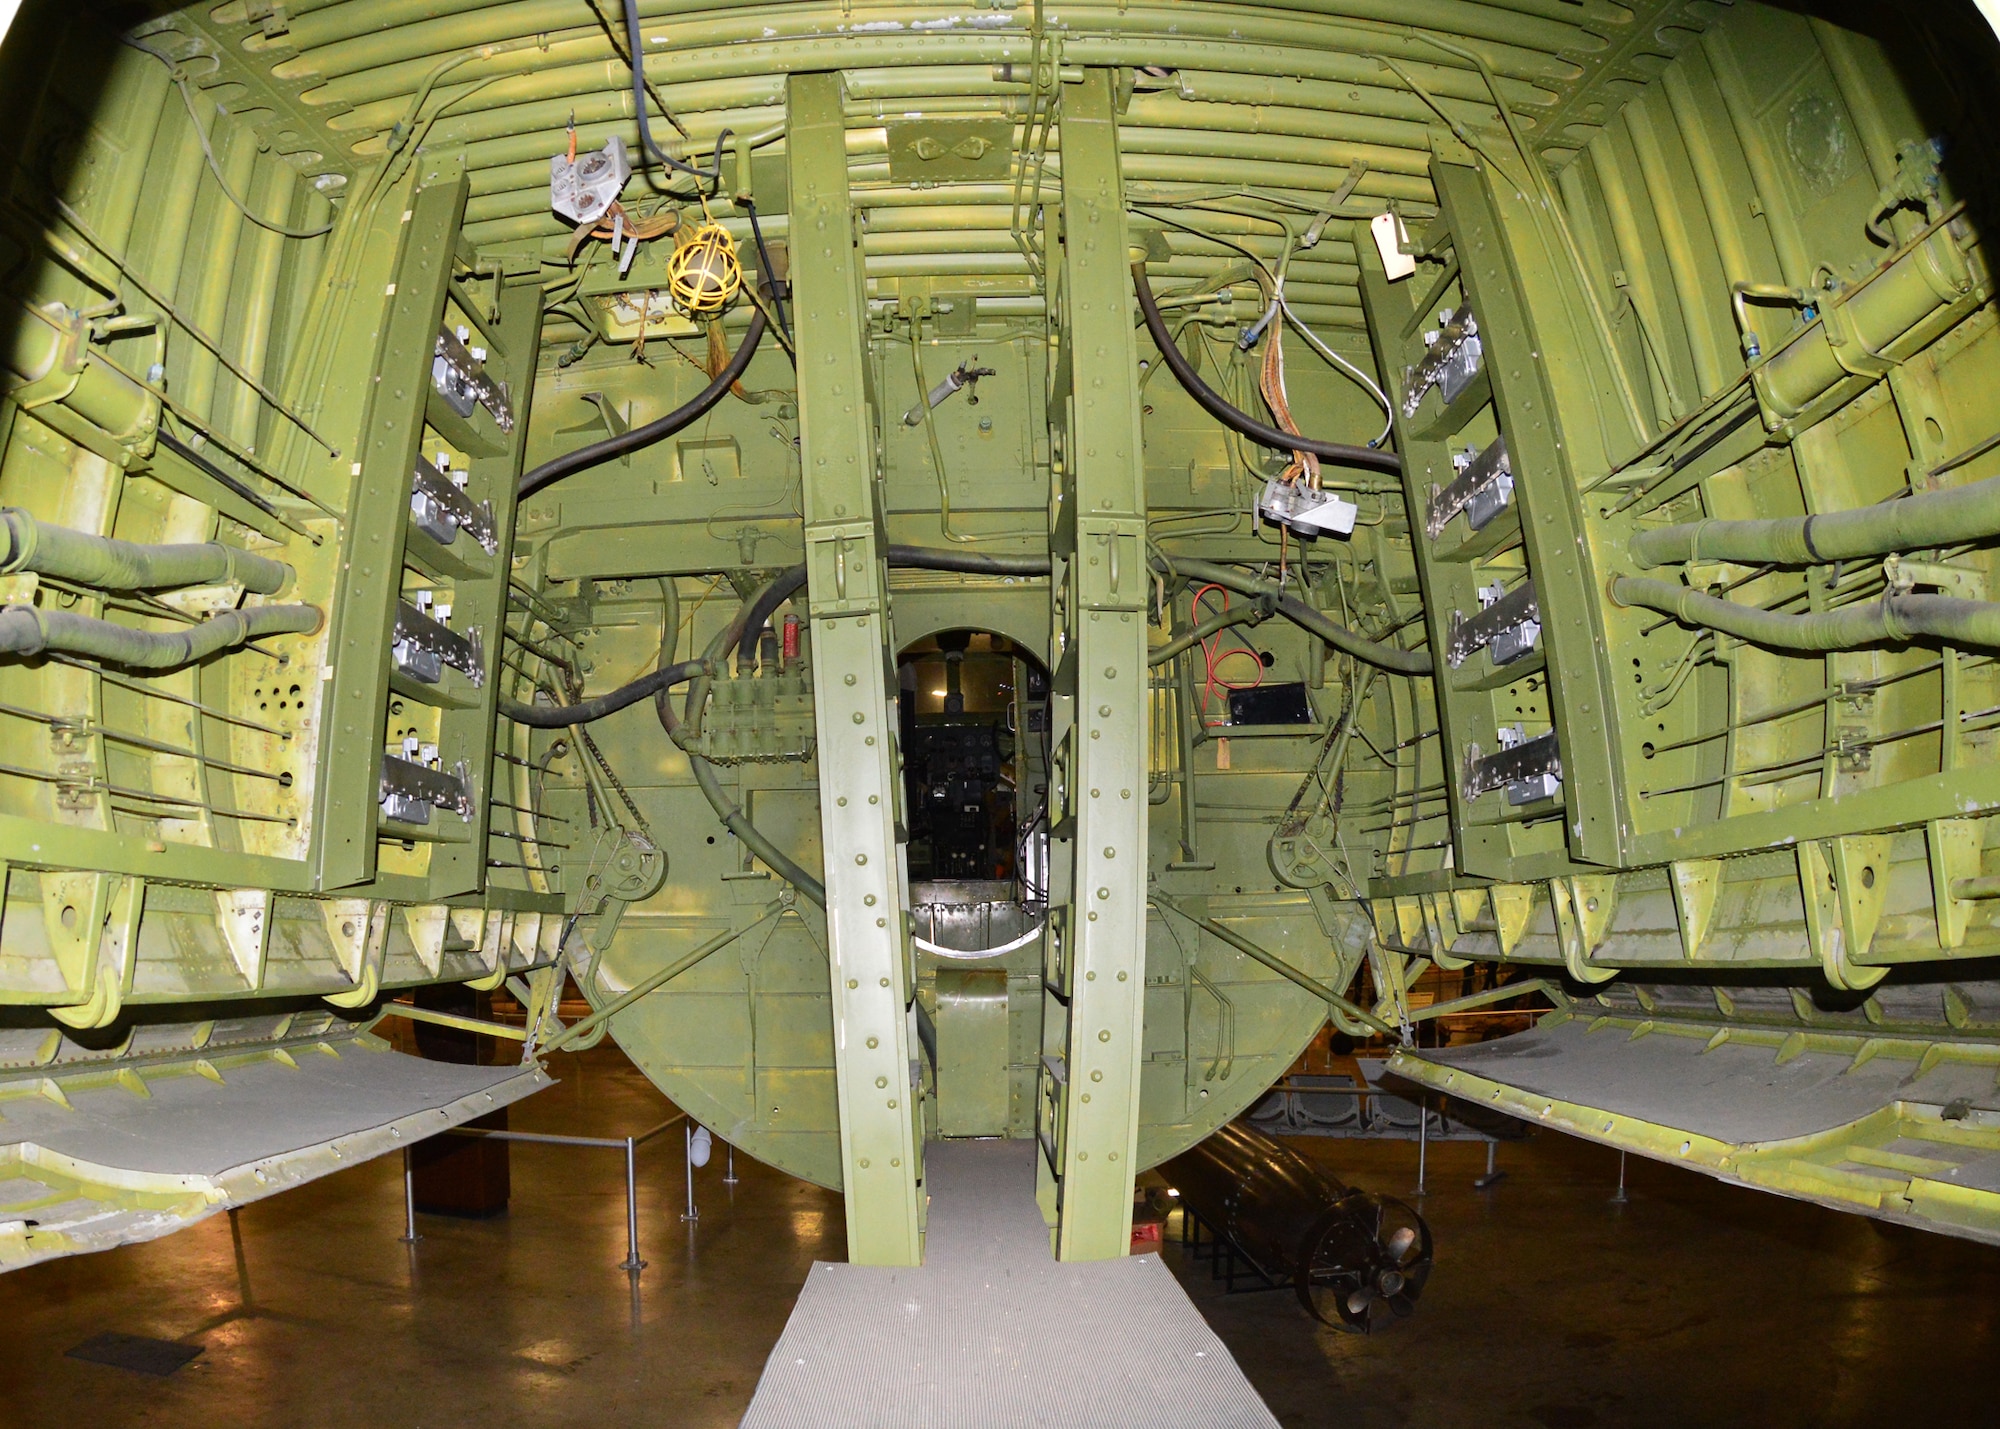 DAYTON, Ohio - Martin B-26G Marauder interior view of the bomb bay at the National Museum of the U.S. Air Force. (U.S. Air Force photo)